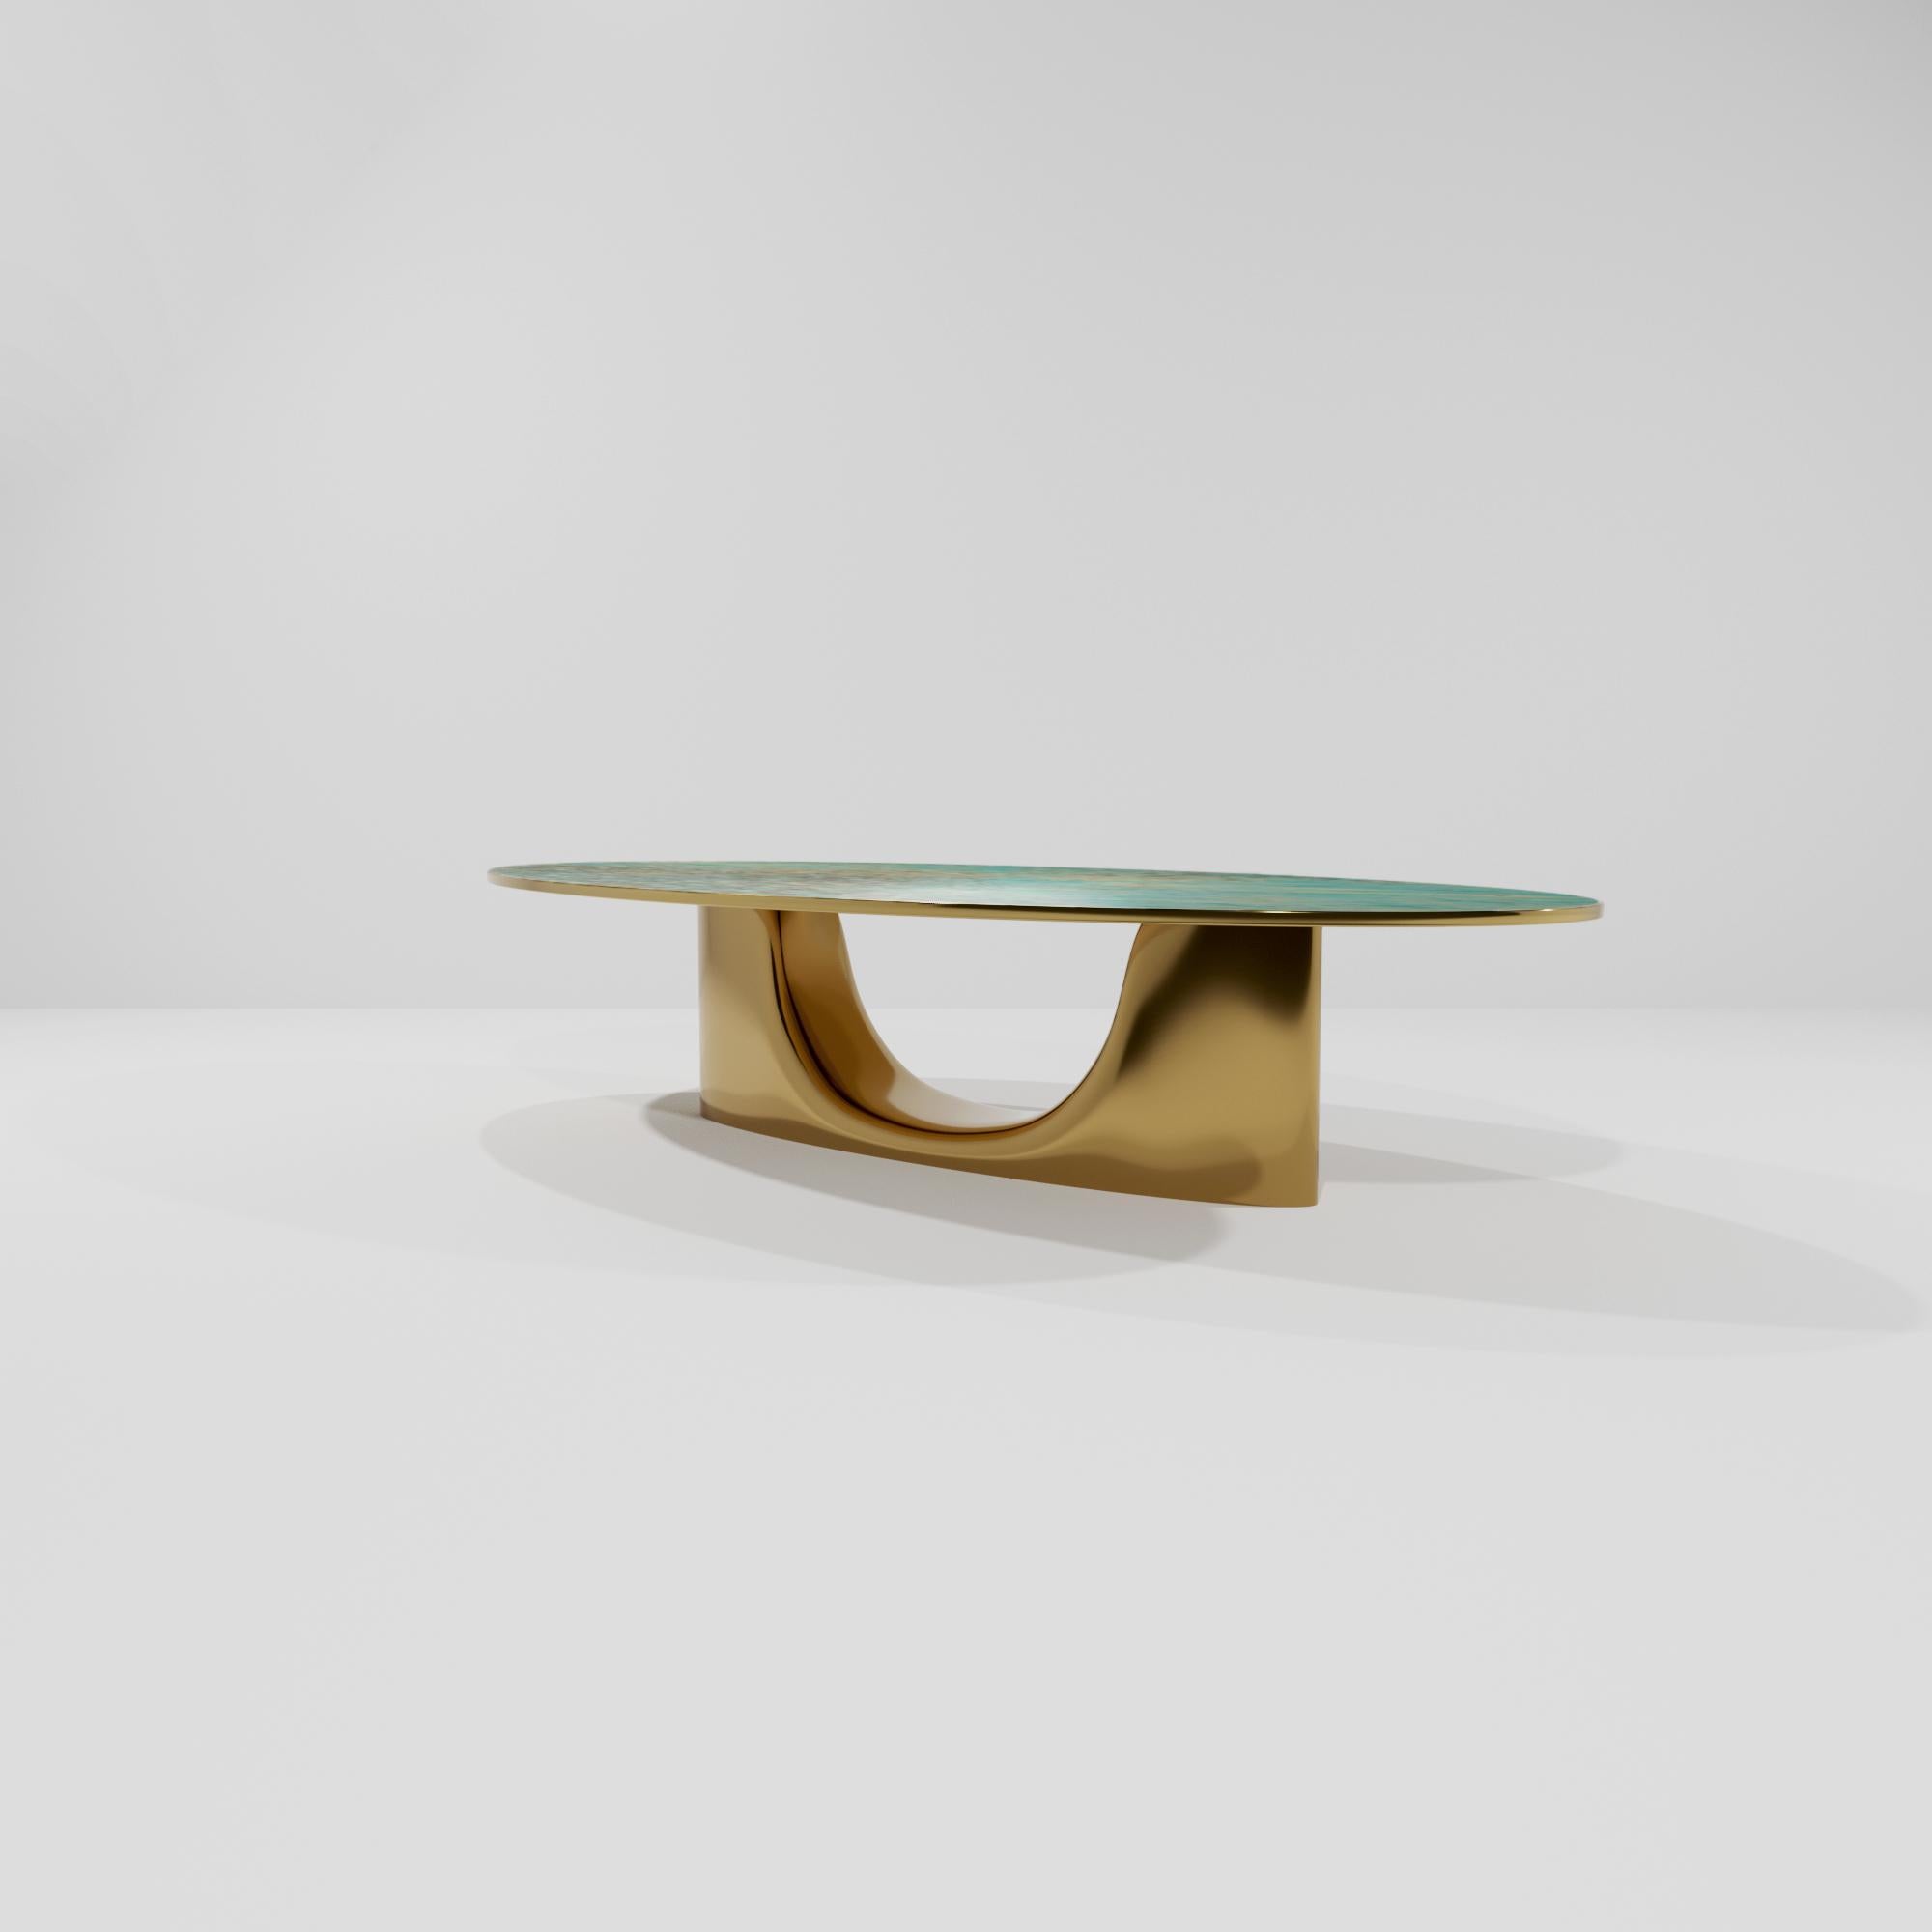 Contemporary BIS, 21st Century Blue Green Patina Layered Bronzed Dining Table by Studio SORS